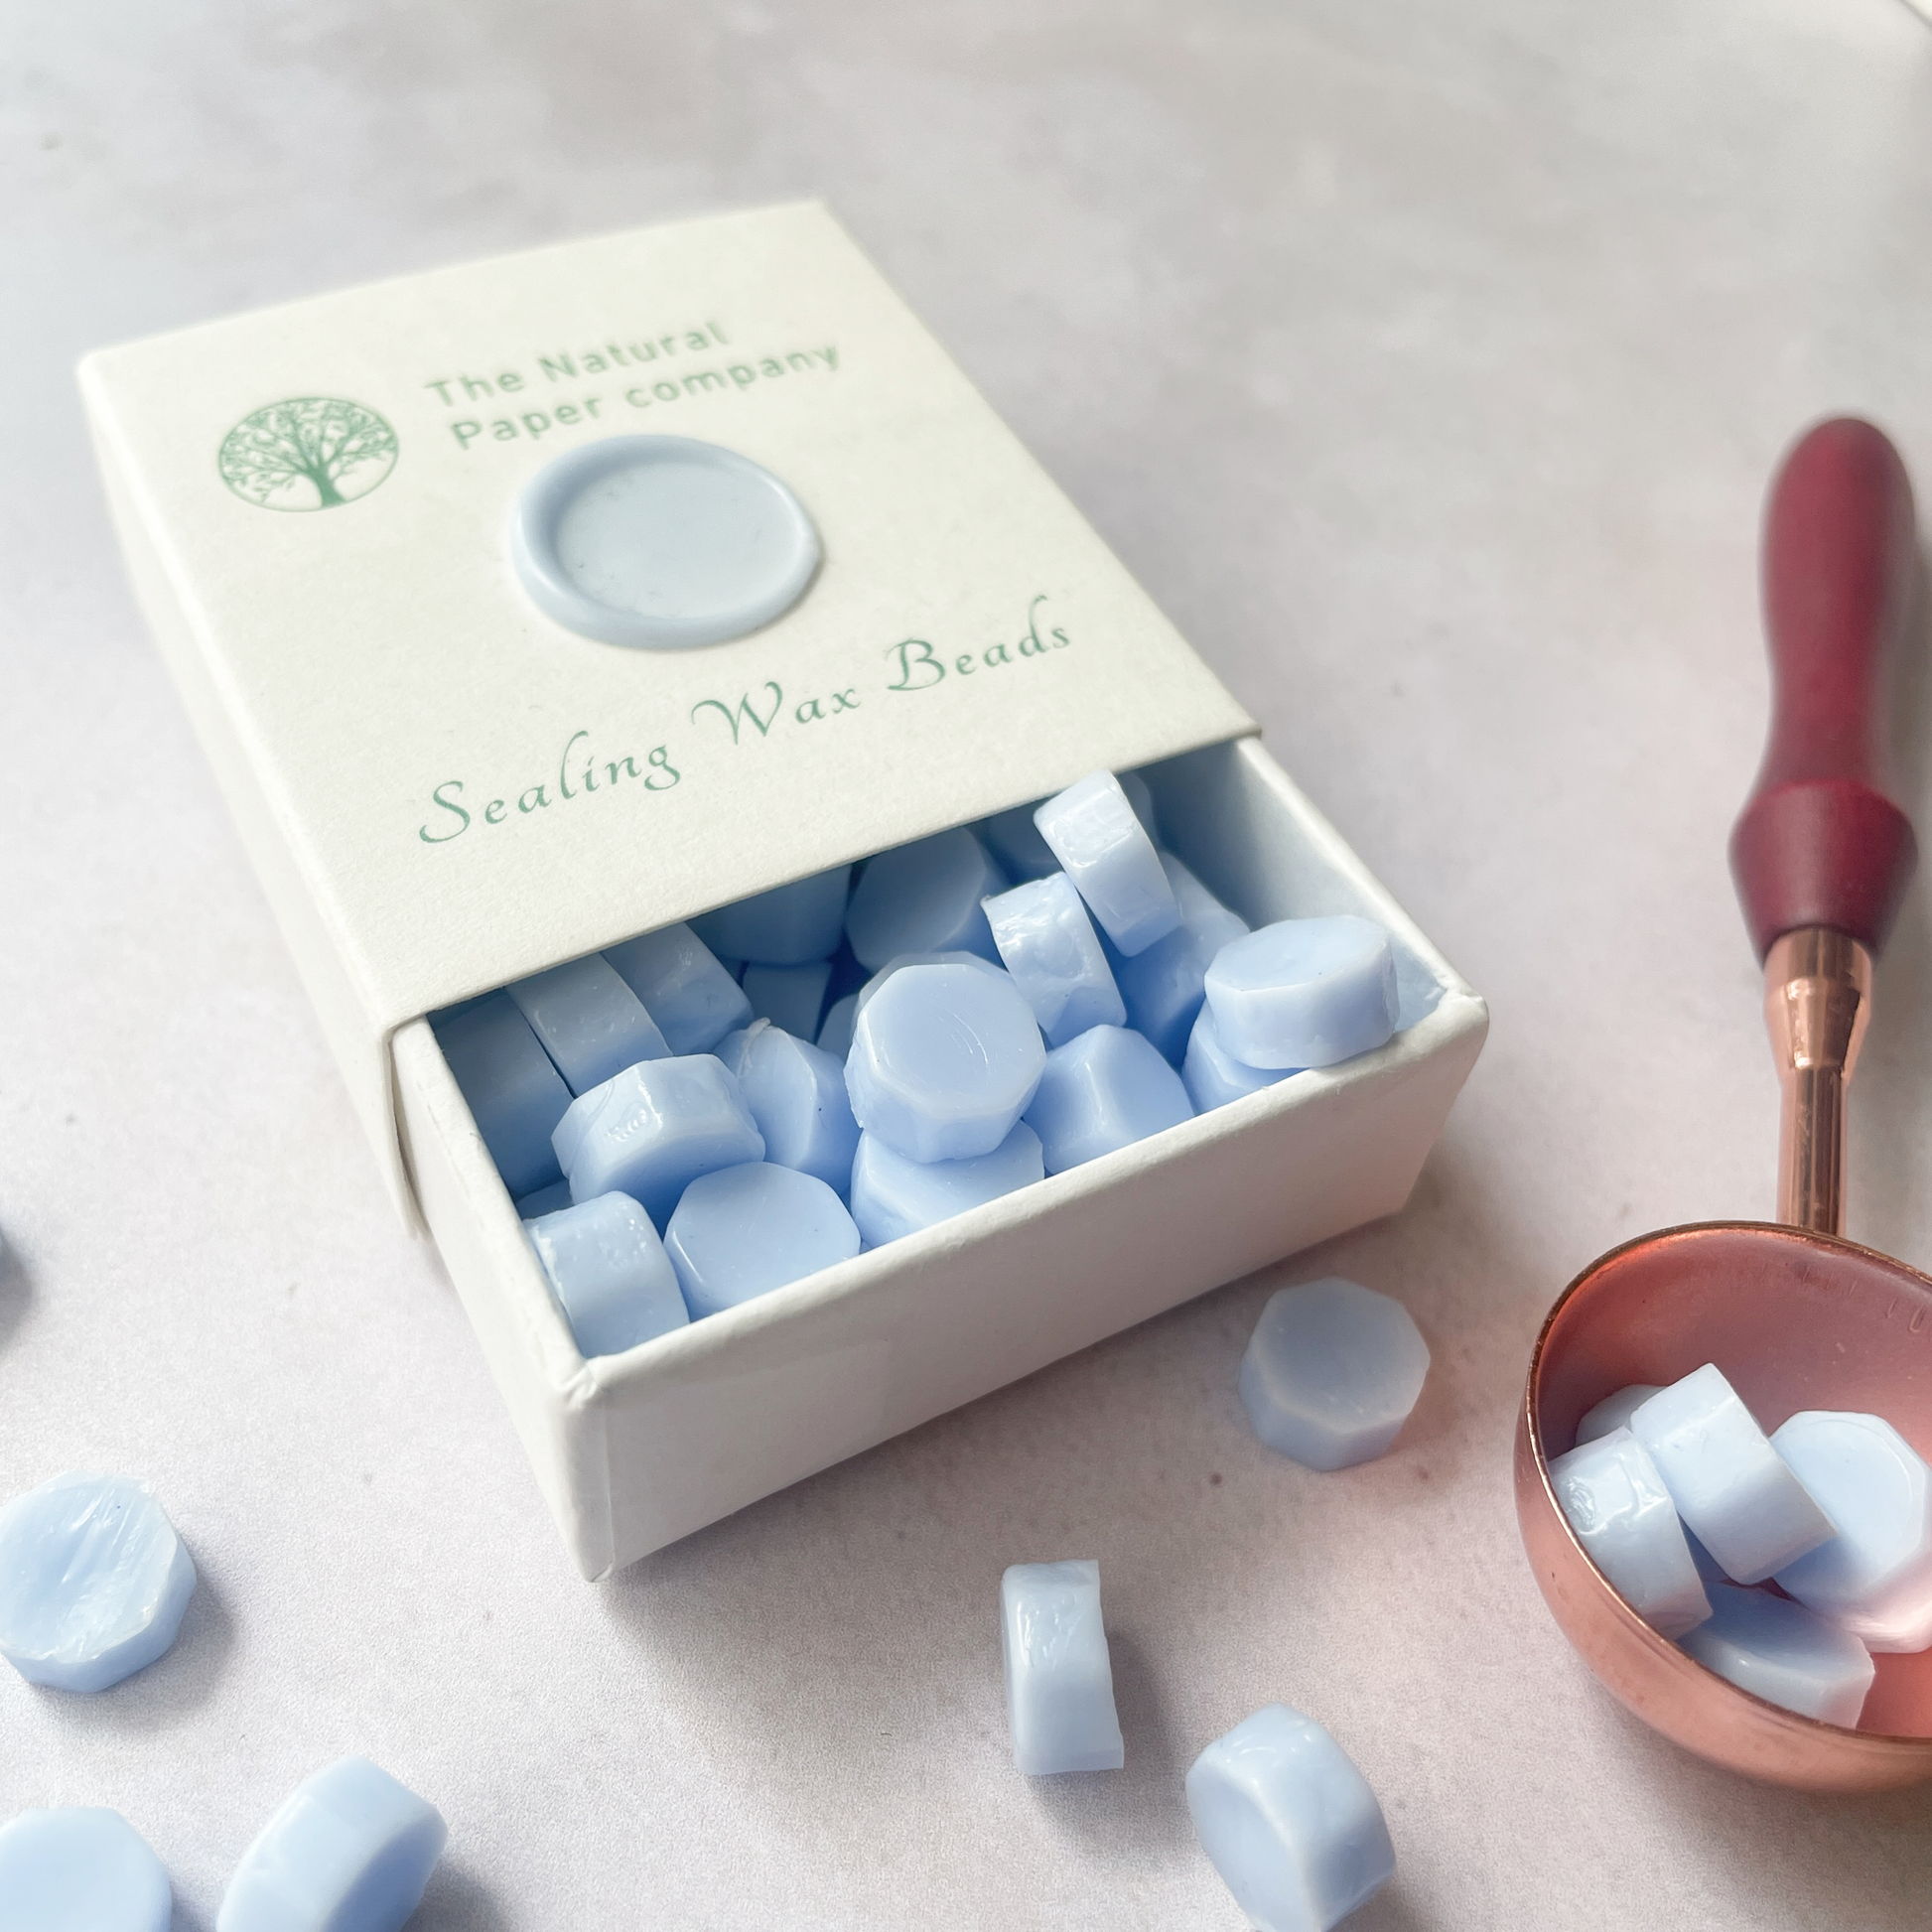 Light blue wax seal beads in a box.  Eco friendly sealing wax beads to make wax seals.  By The Natural paper Company